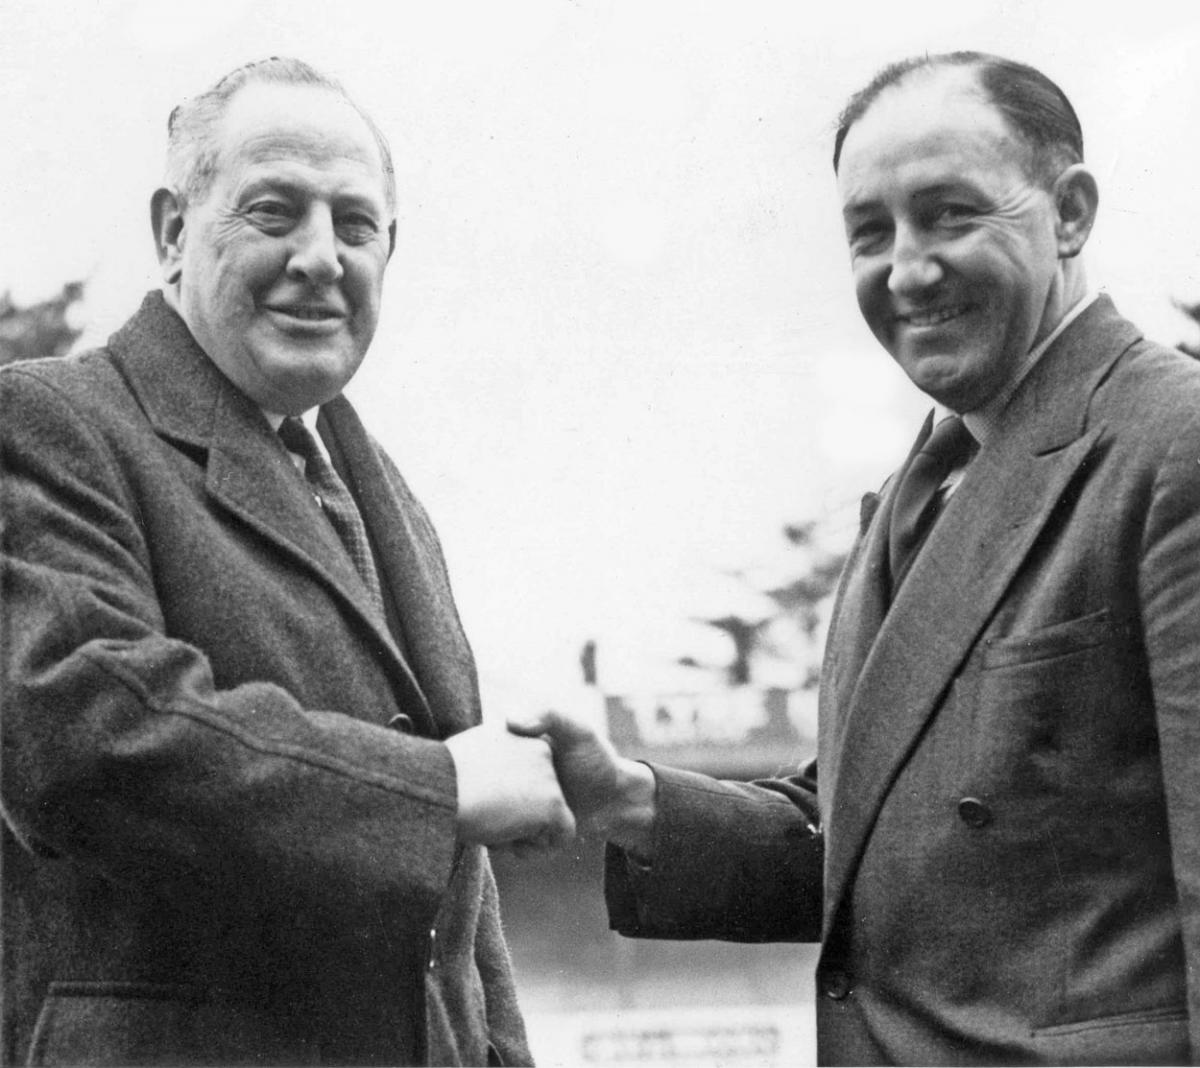 Reg Hayward, left, welcomes  Freddie Cox, right, Boscombe's new manager 14th April 1956.  A selection of the images that are featured in the Daily Echo, AFC Bournemouth Photographic Book.